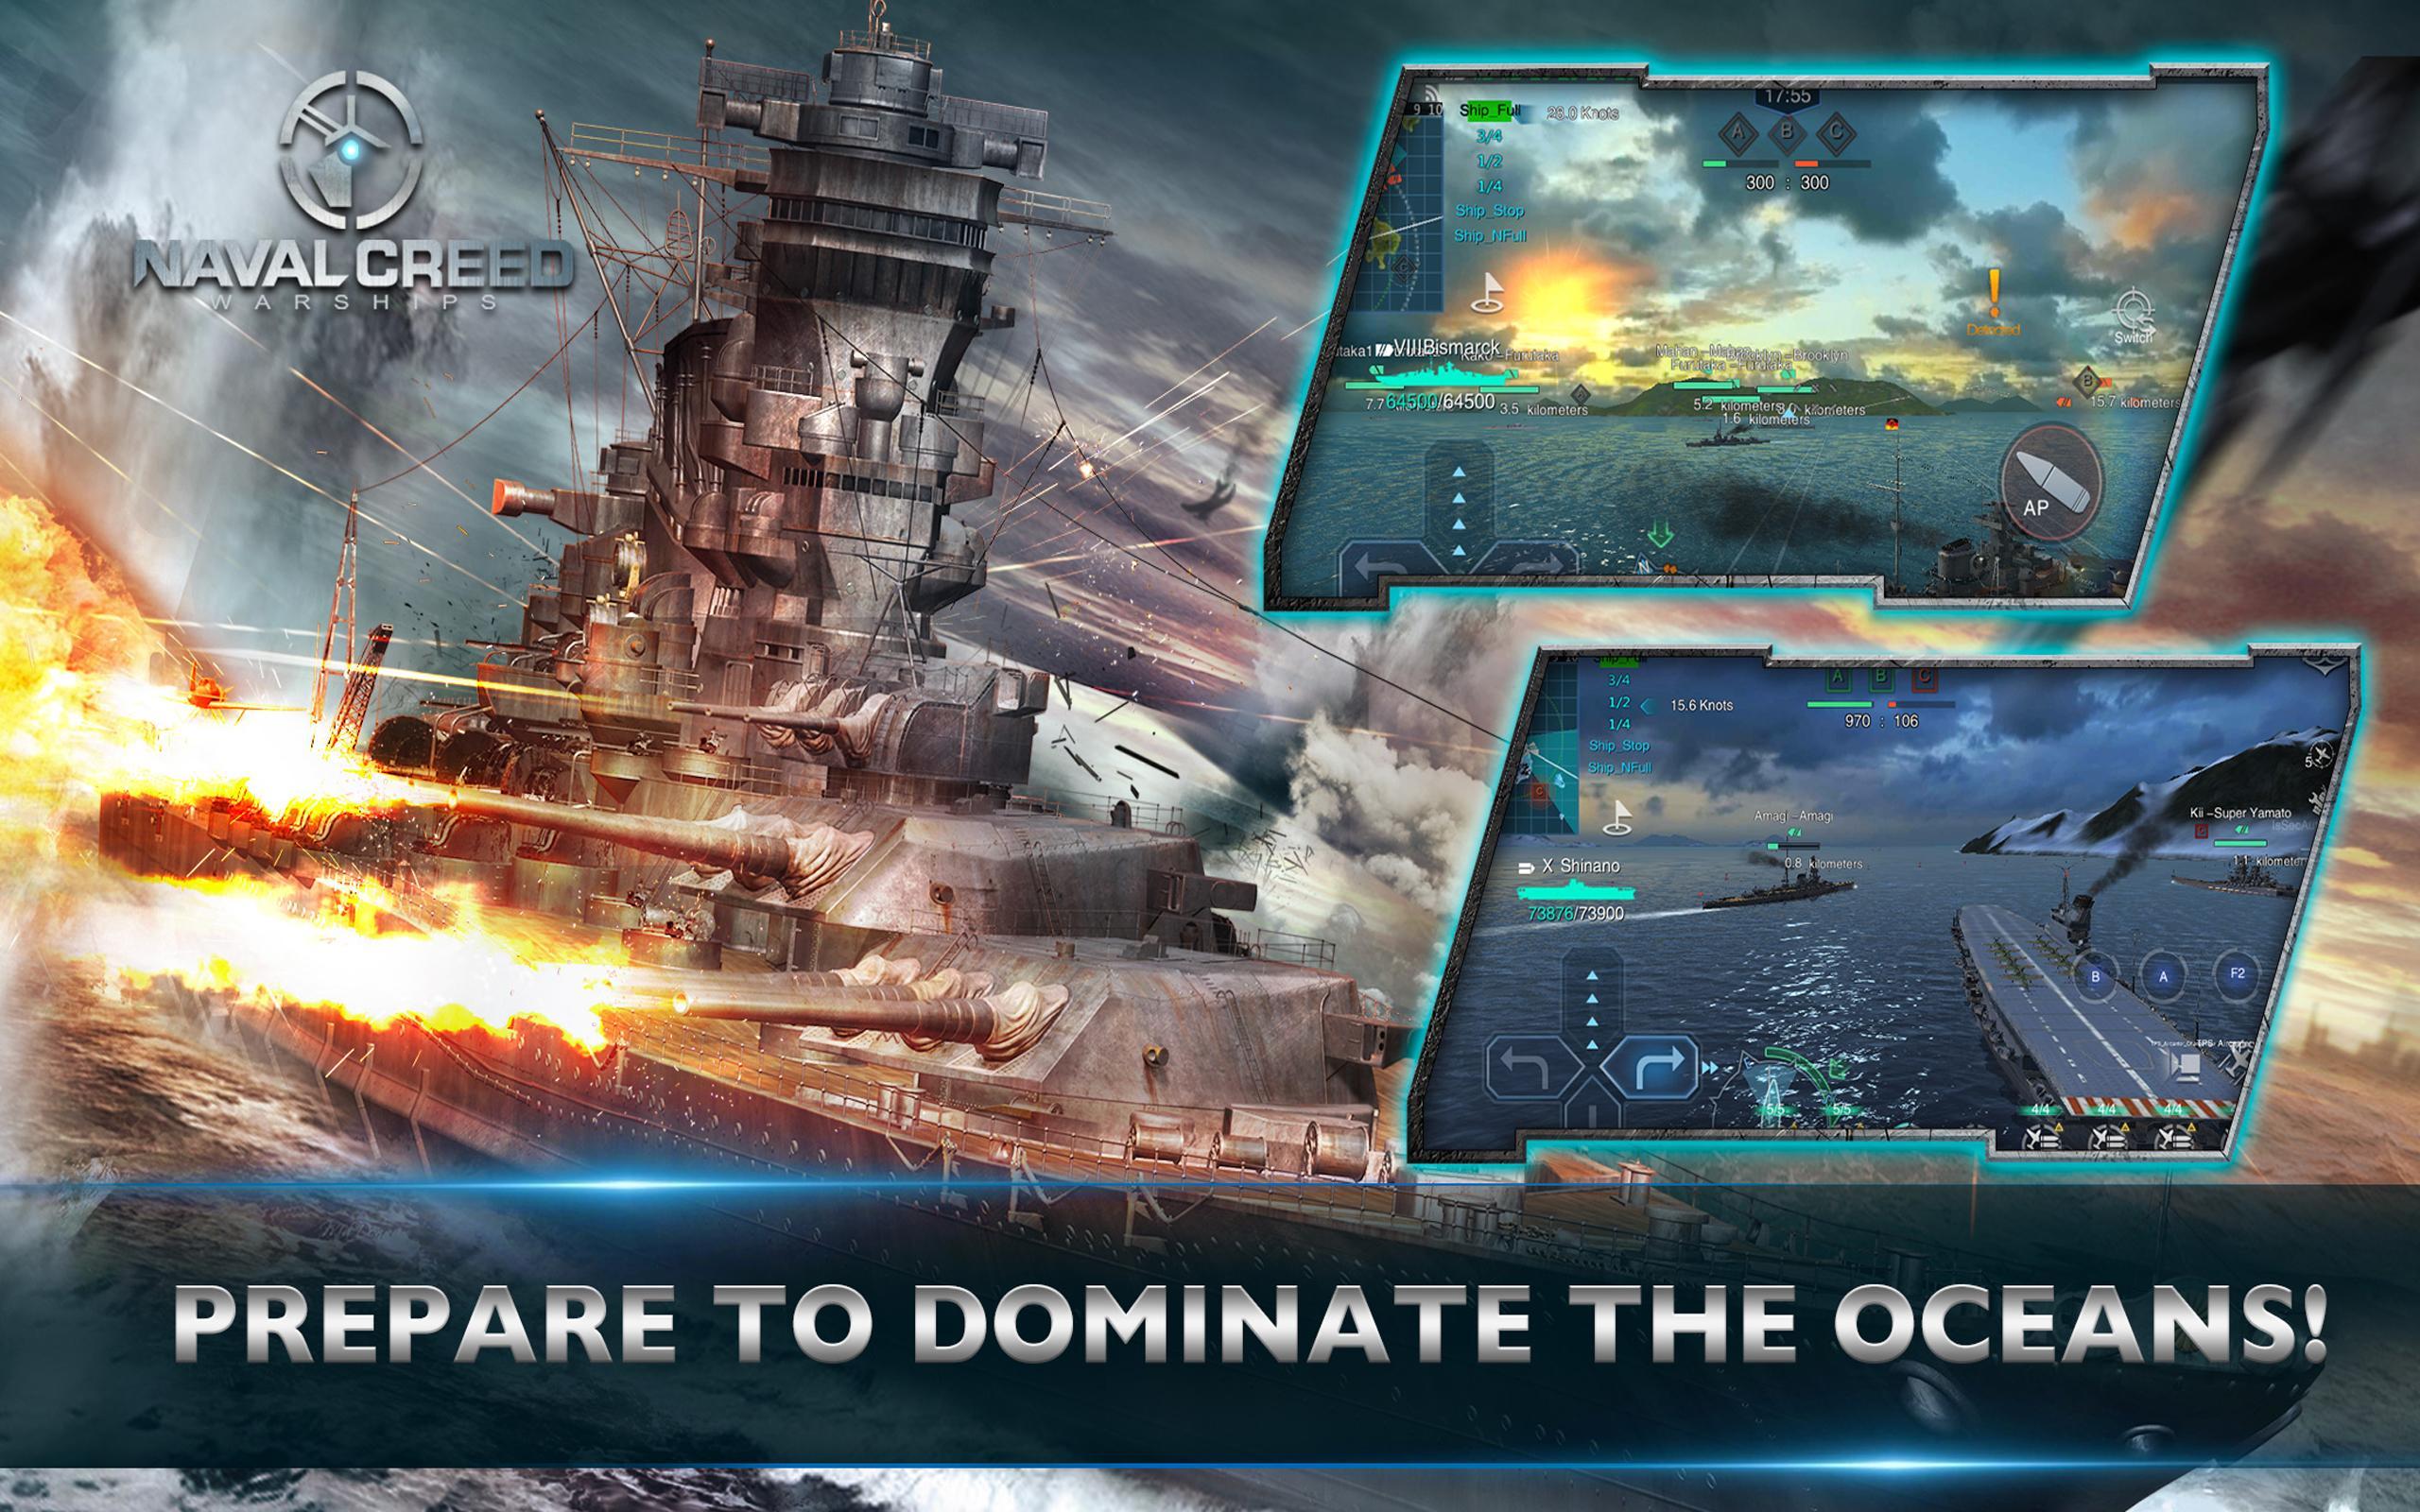 Naval Creed Warships For Android Apk Download Images, Photos, Reviews